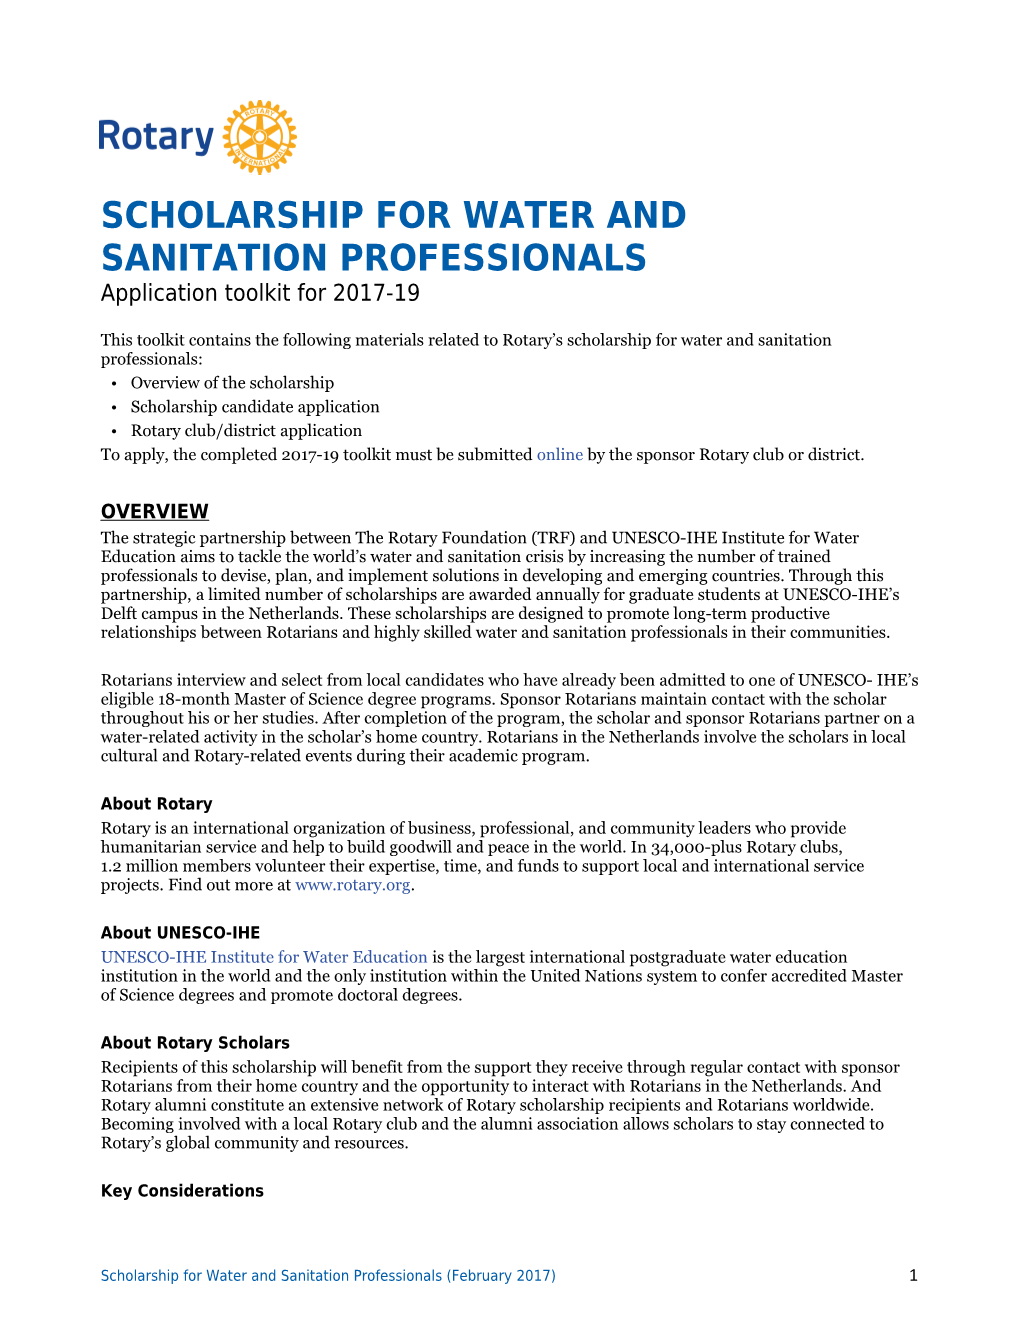 Scholarship for Water and Sanitation Professionals